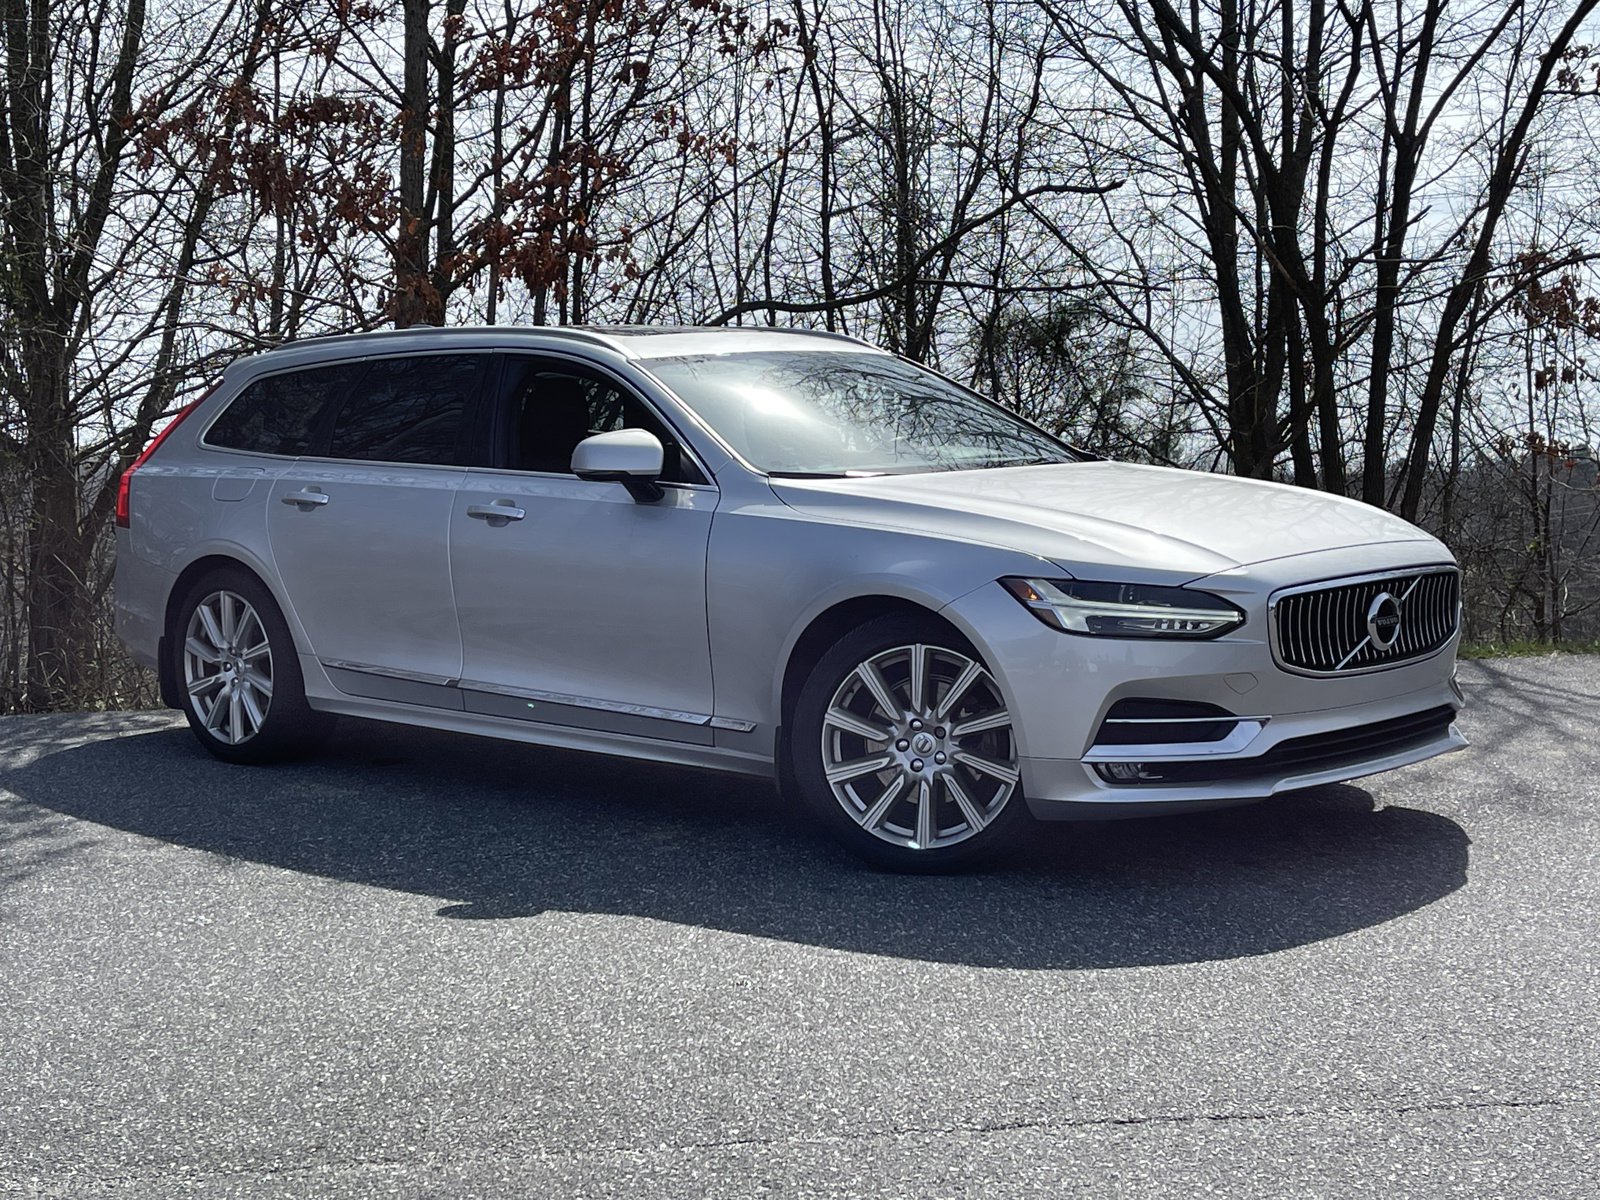 Used 2019 Volvo V90 for Sale Right Now - Autotrader